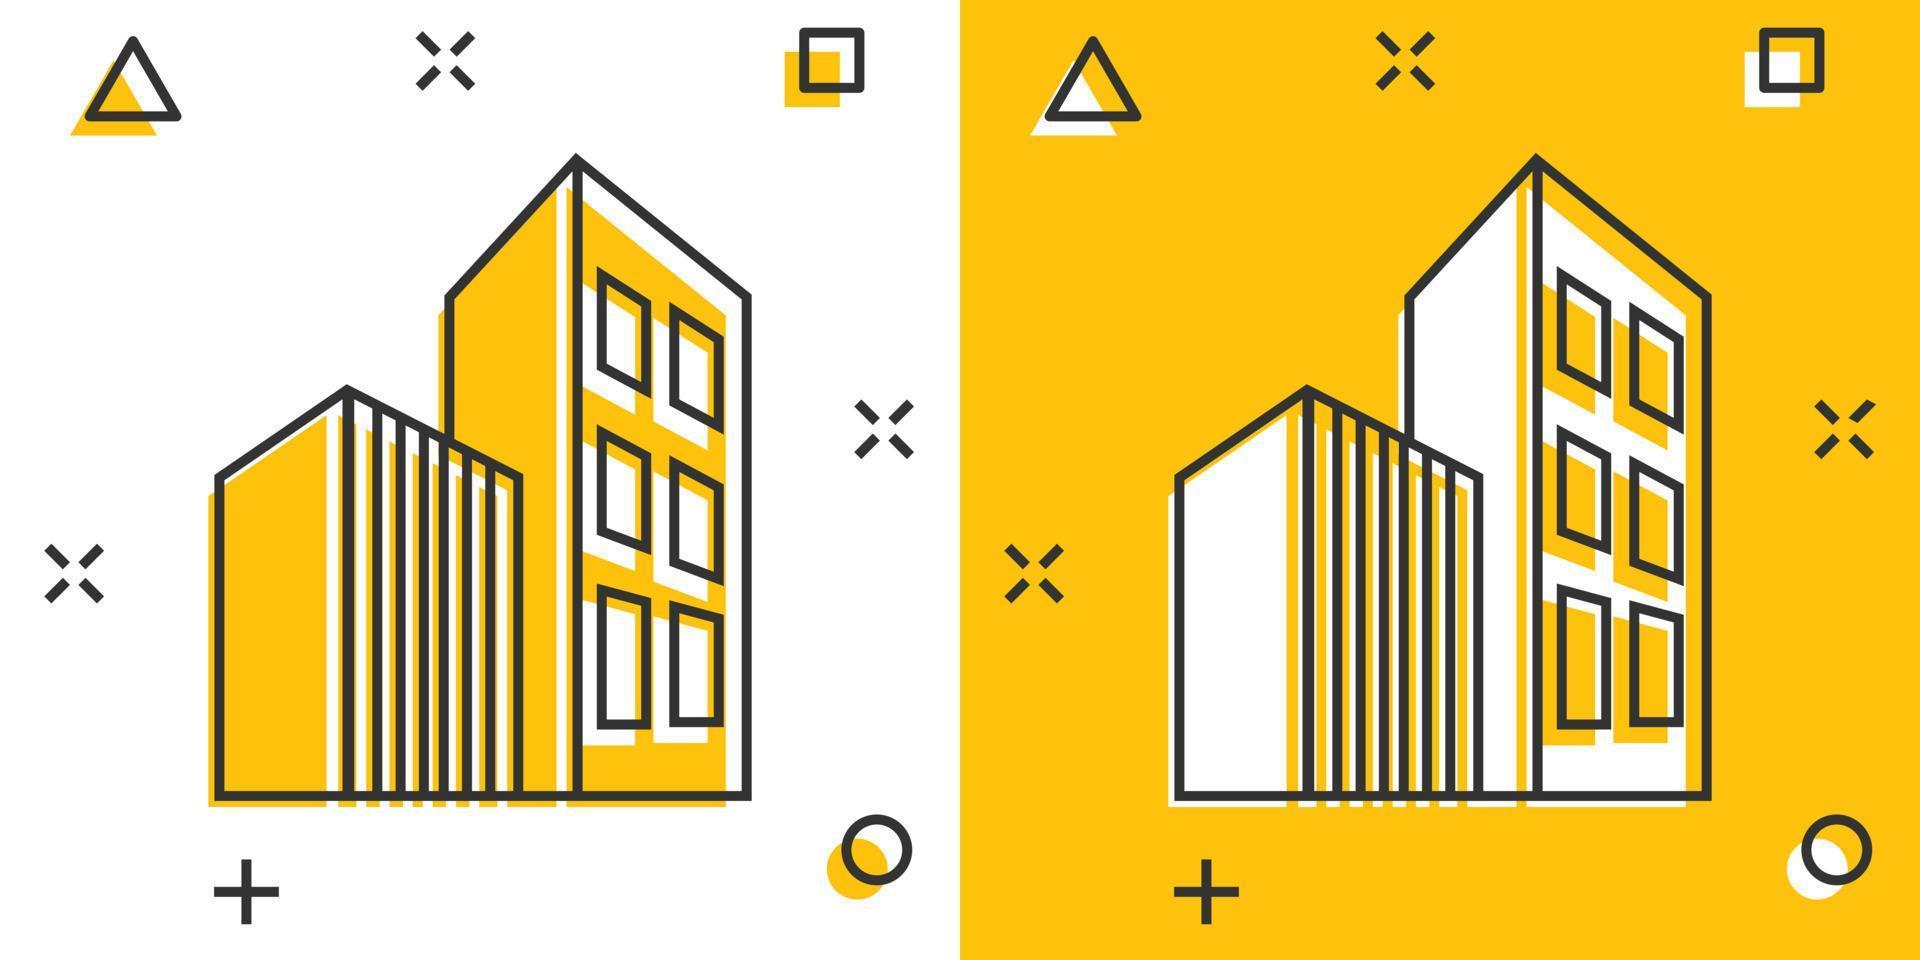 Building icon in comic style. Skyscraper cartoon vector illustration on white isolated background. Architecture splash effect business concept.